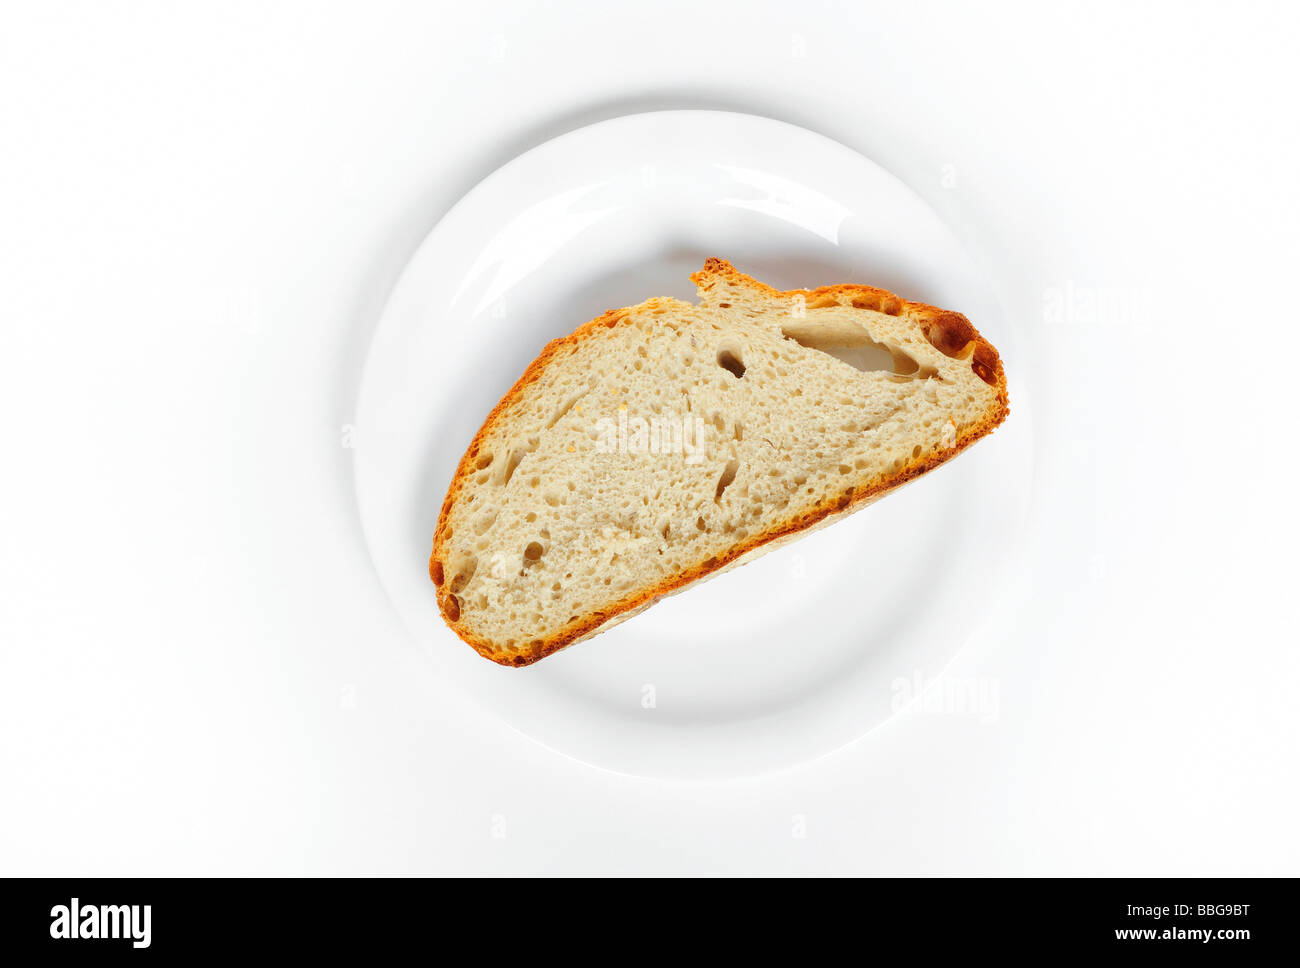 A slice of bread on a plate Stock Photo